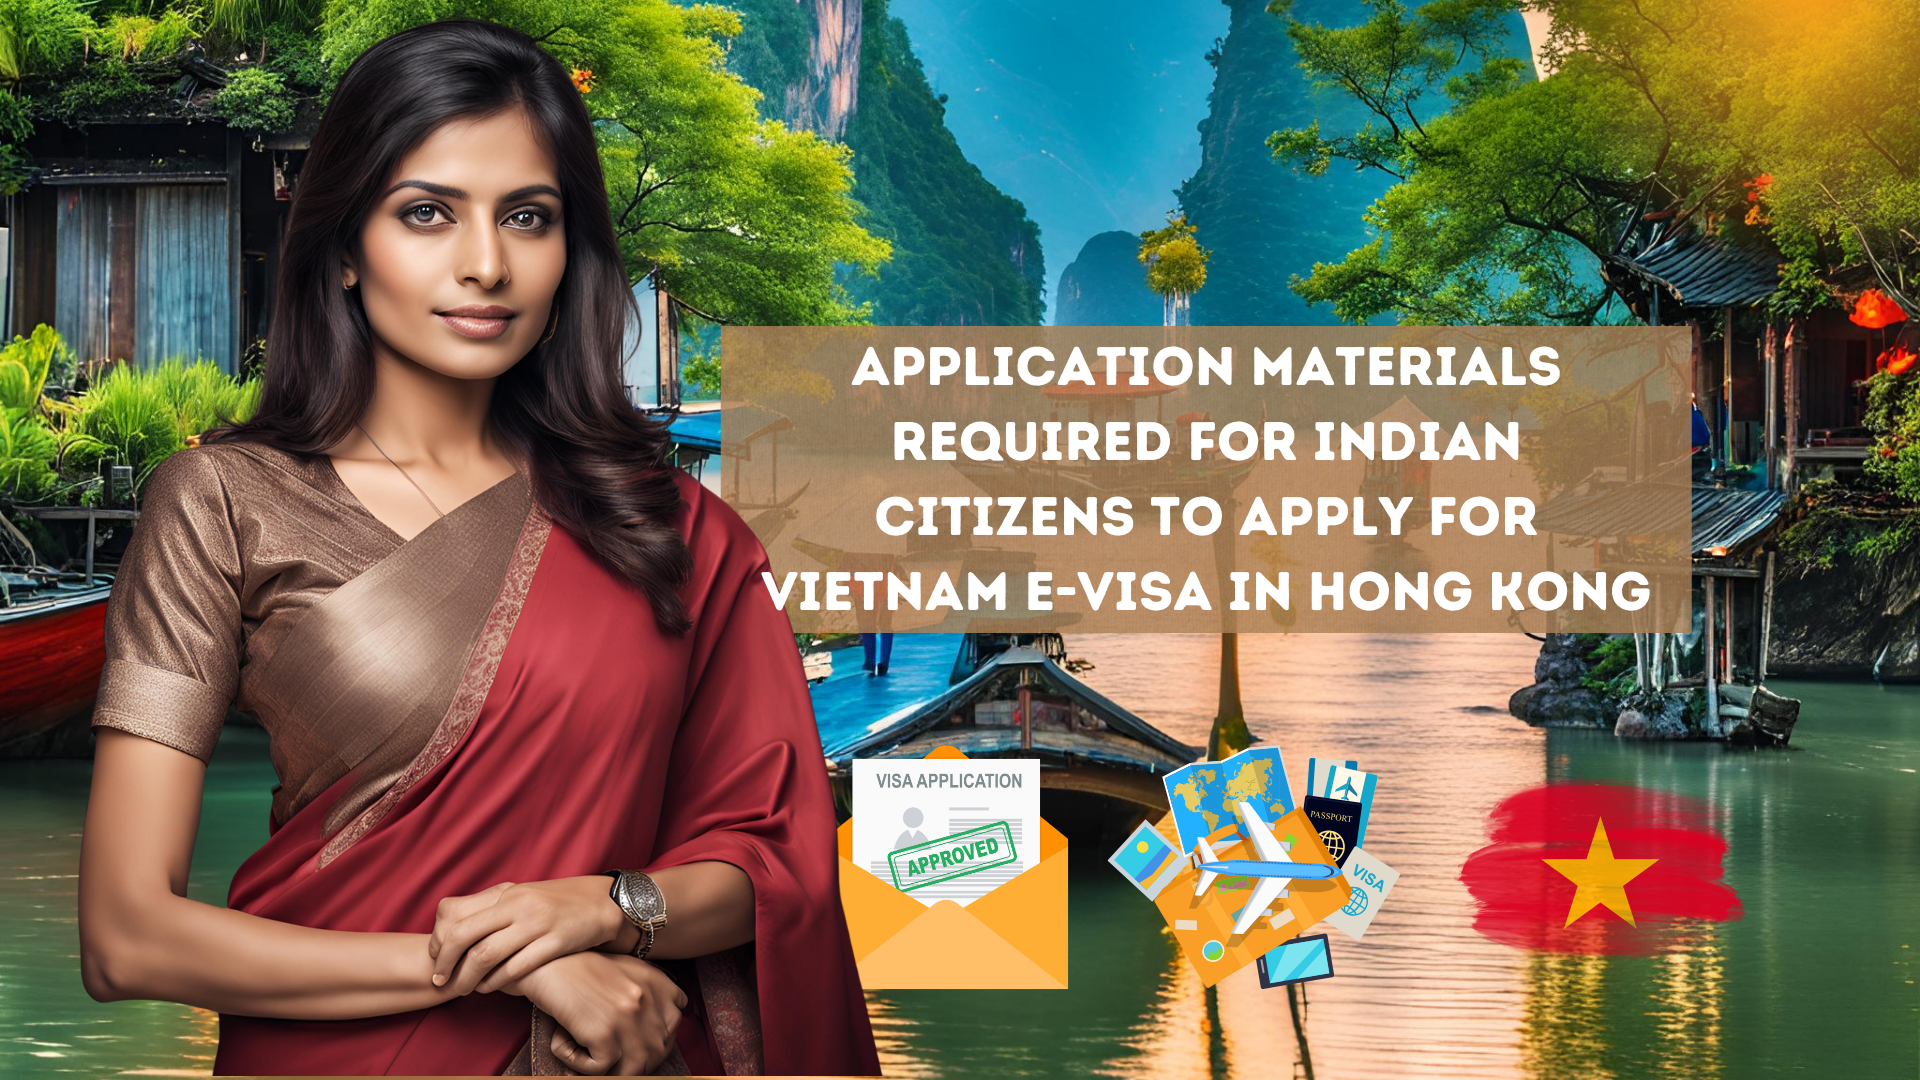 Application materials required for Indian citizens to apply for Vietnam e-visa in Hong Kong